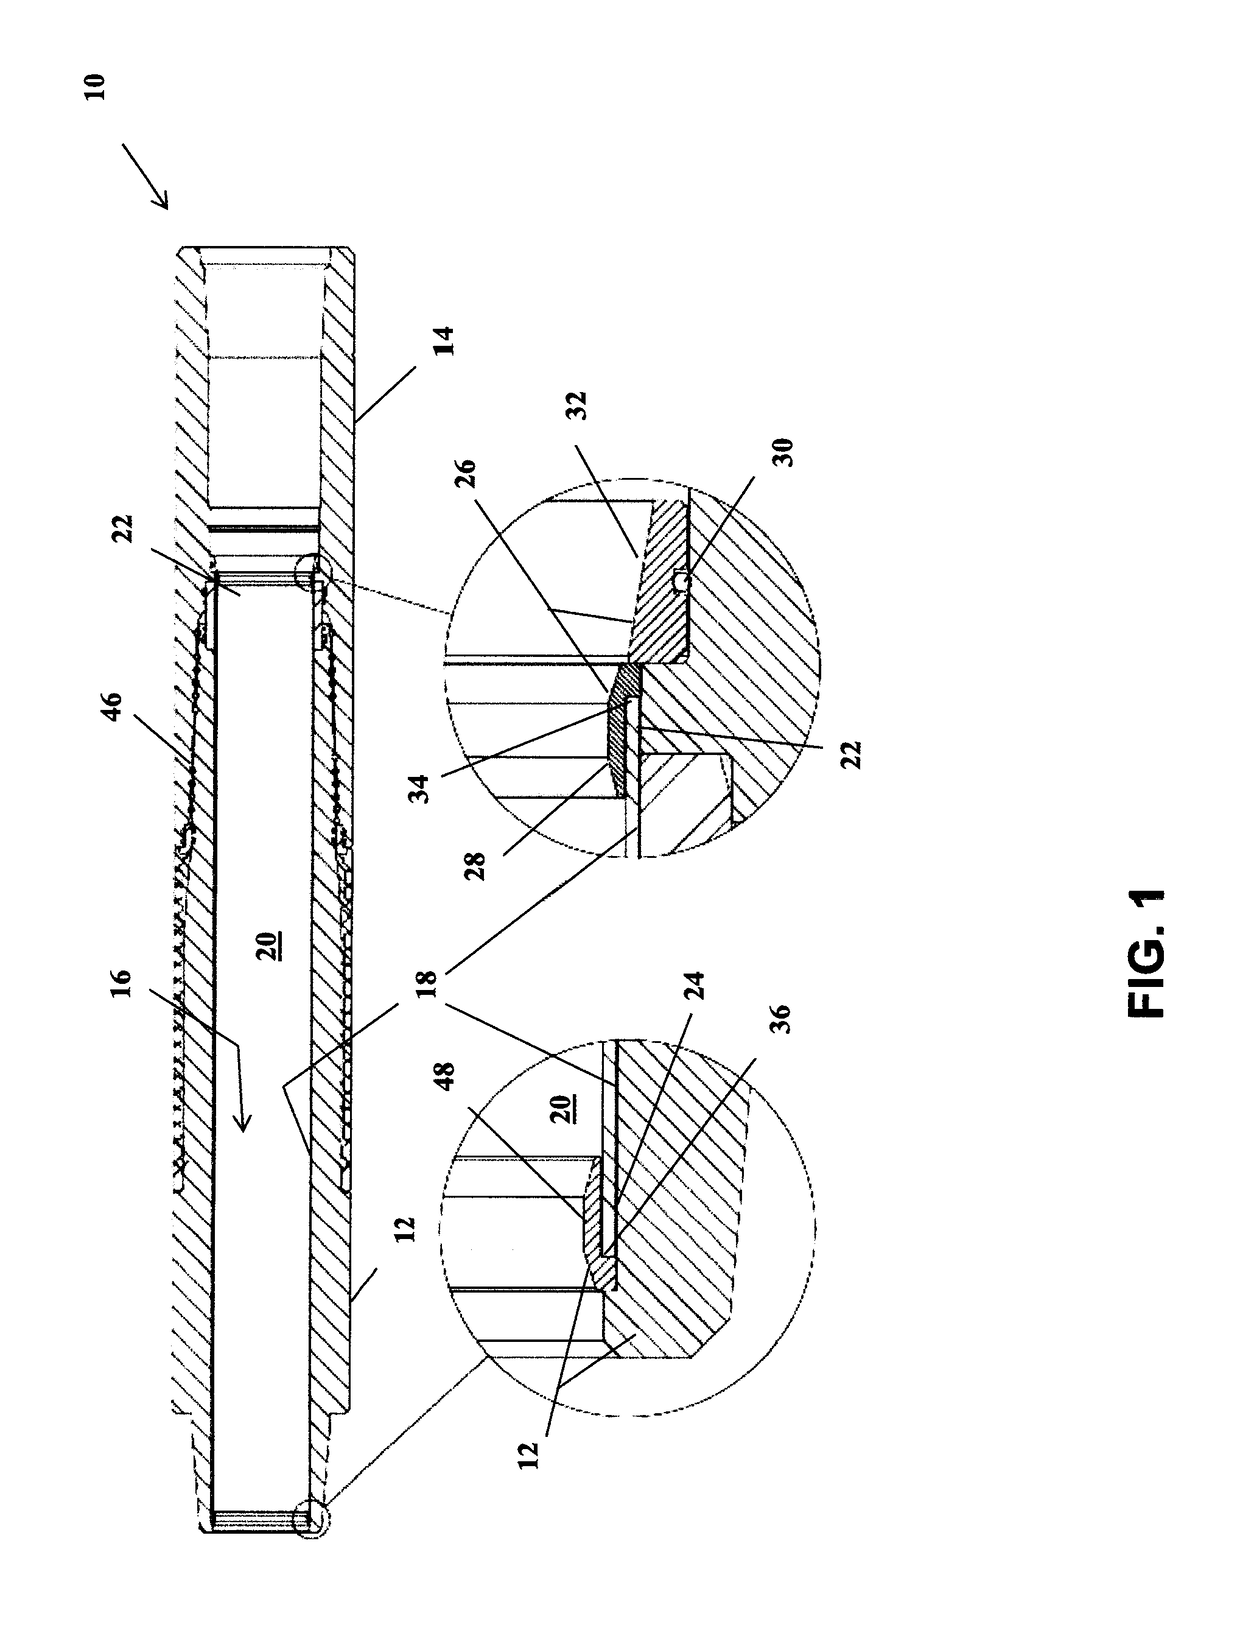 Device and method for securing conduit interior wear sleeve